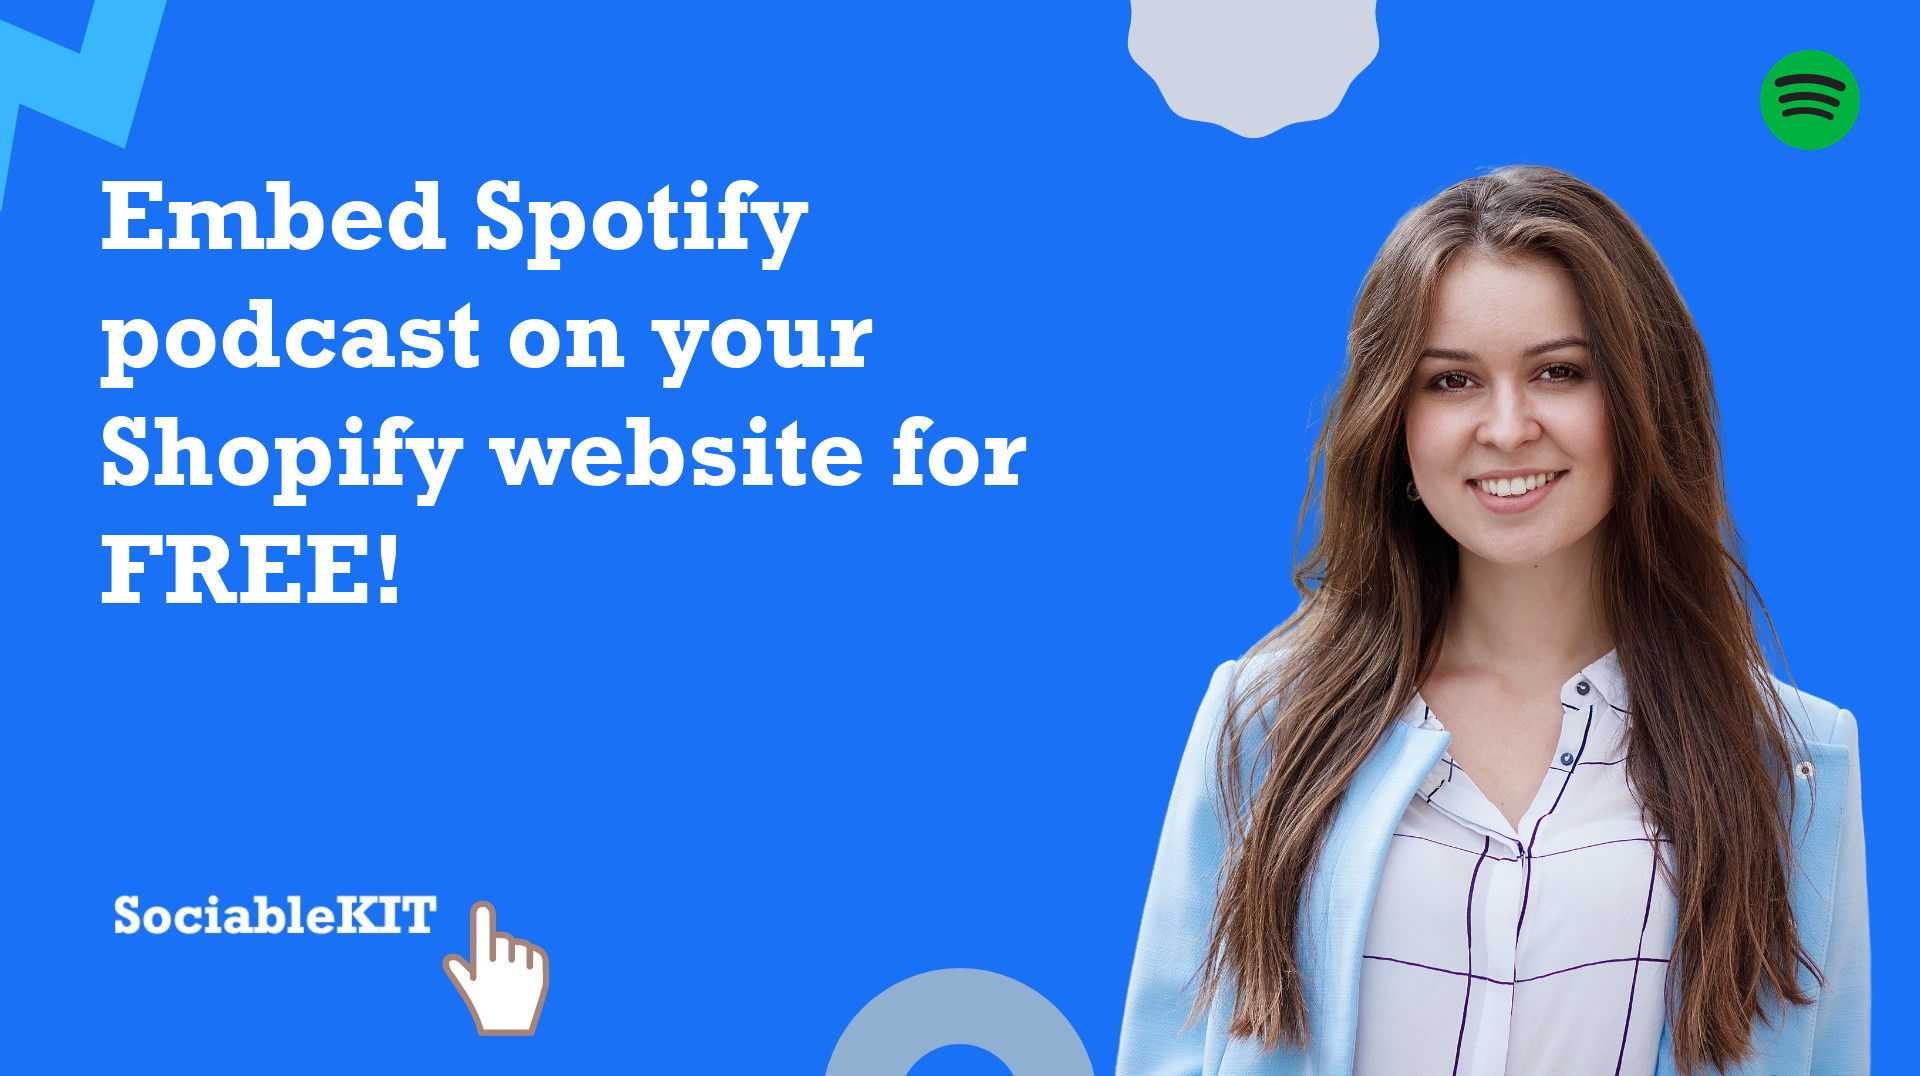 How to embed Spotify podcast on your Shopify website for FREE?